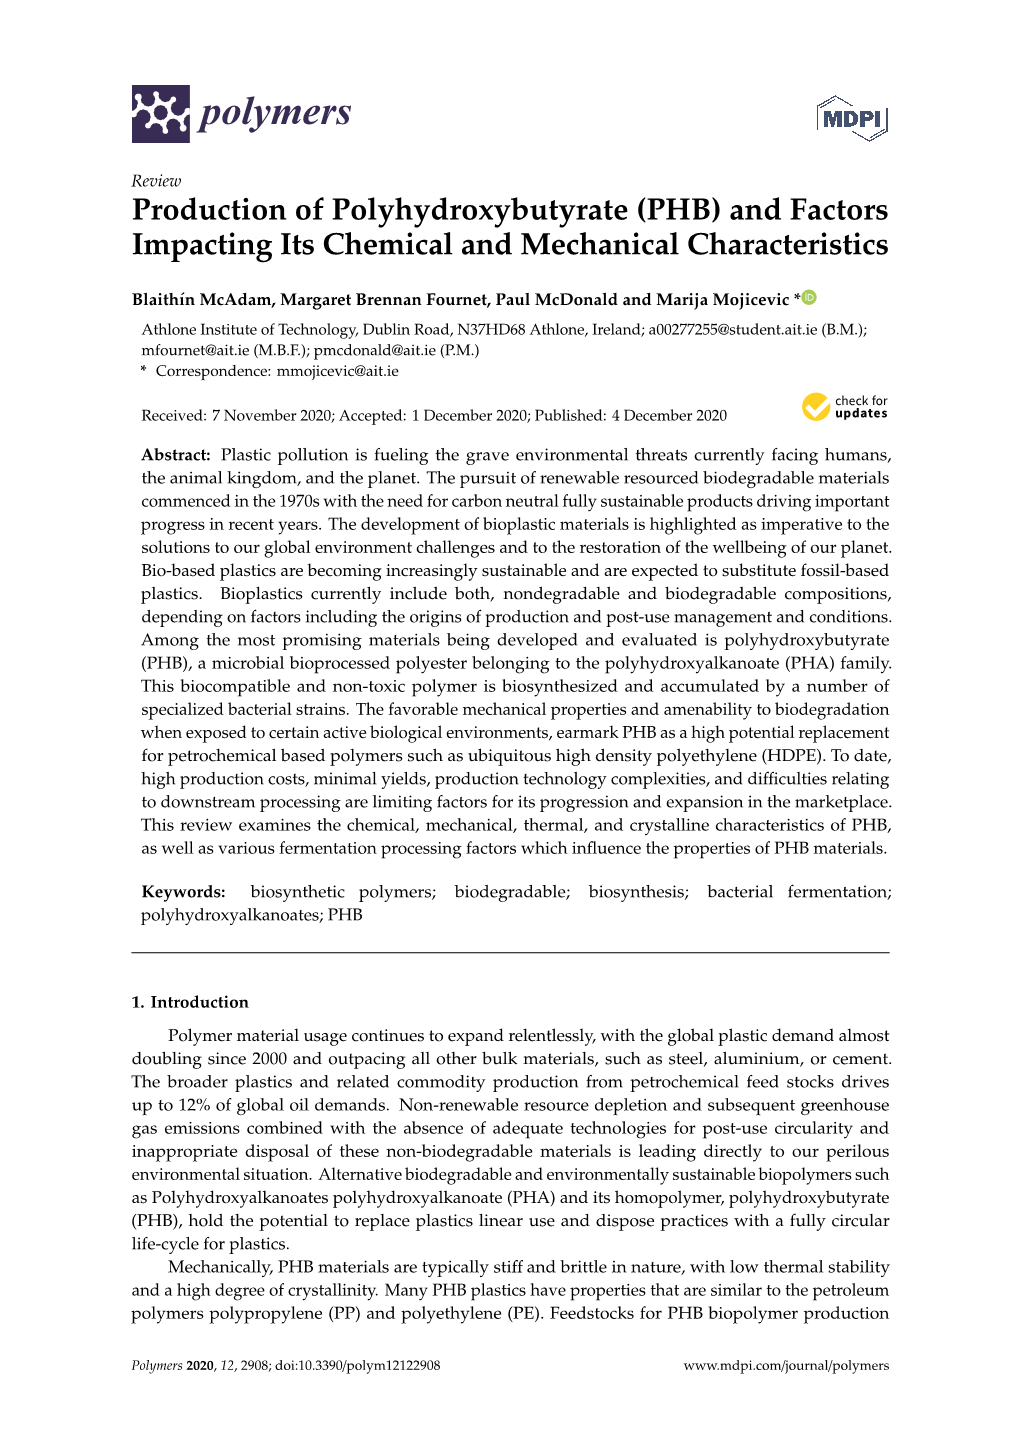 PHB) and Factors Impacting Its Chemical and Mechanical Characteristics